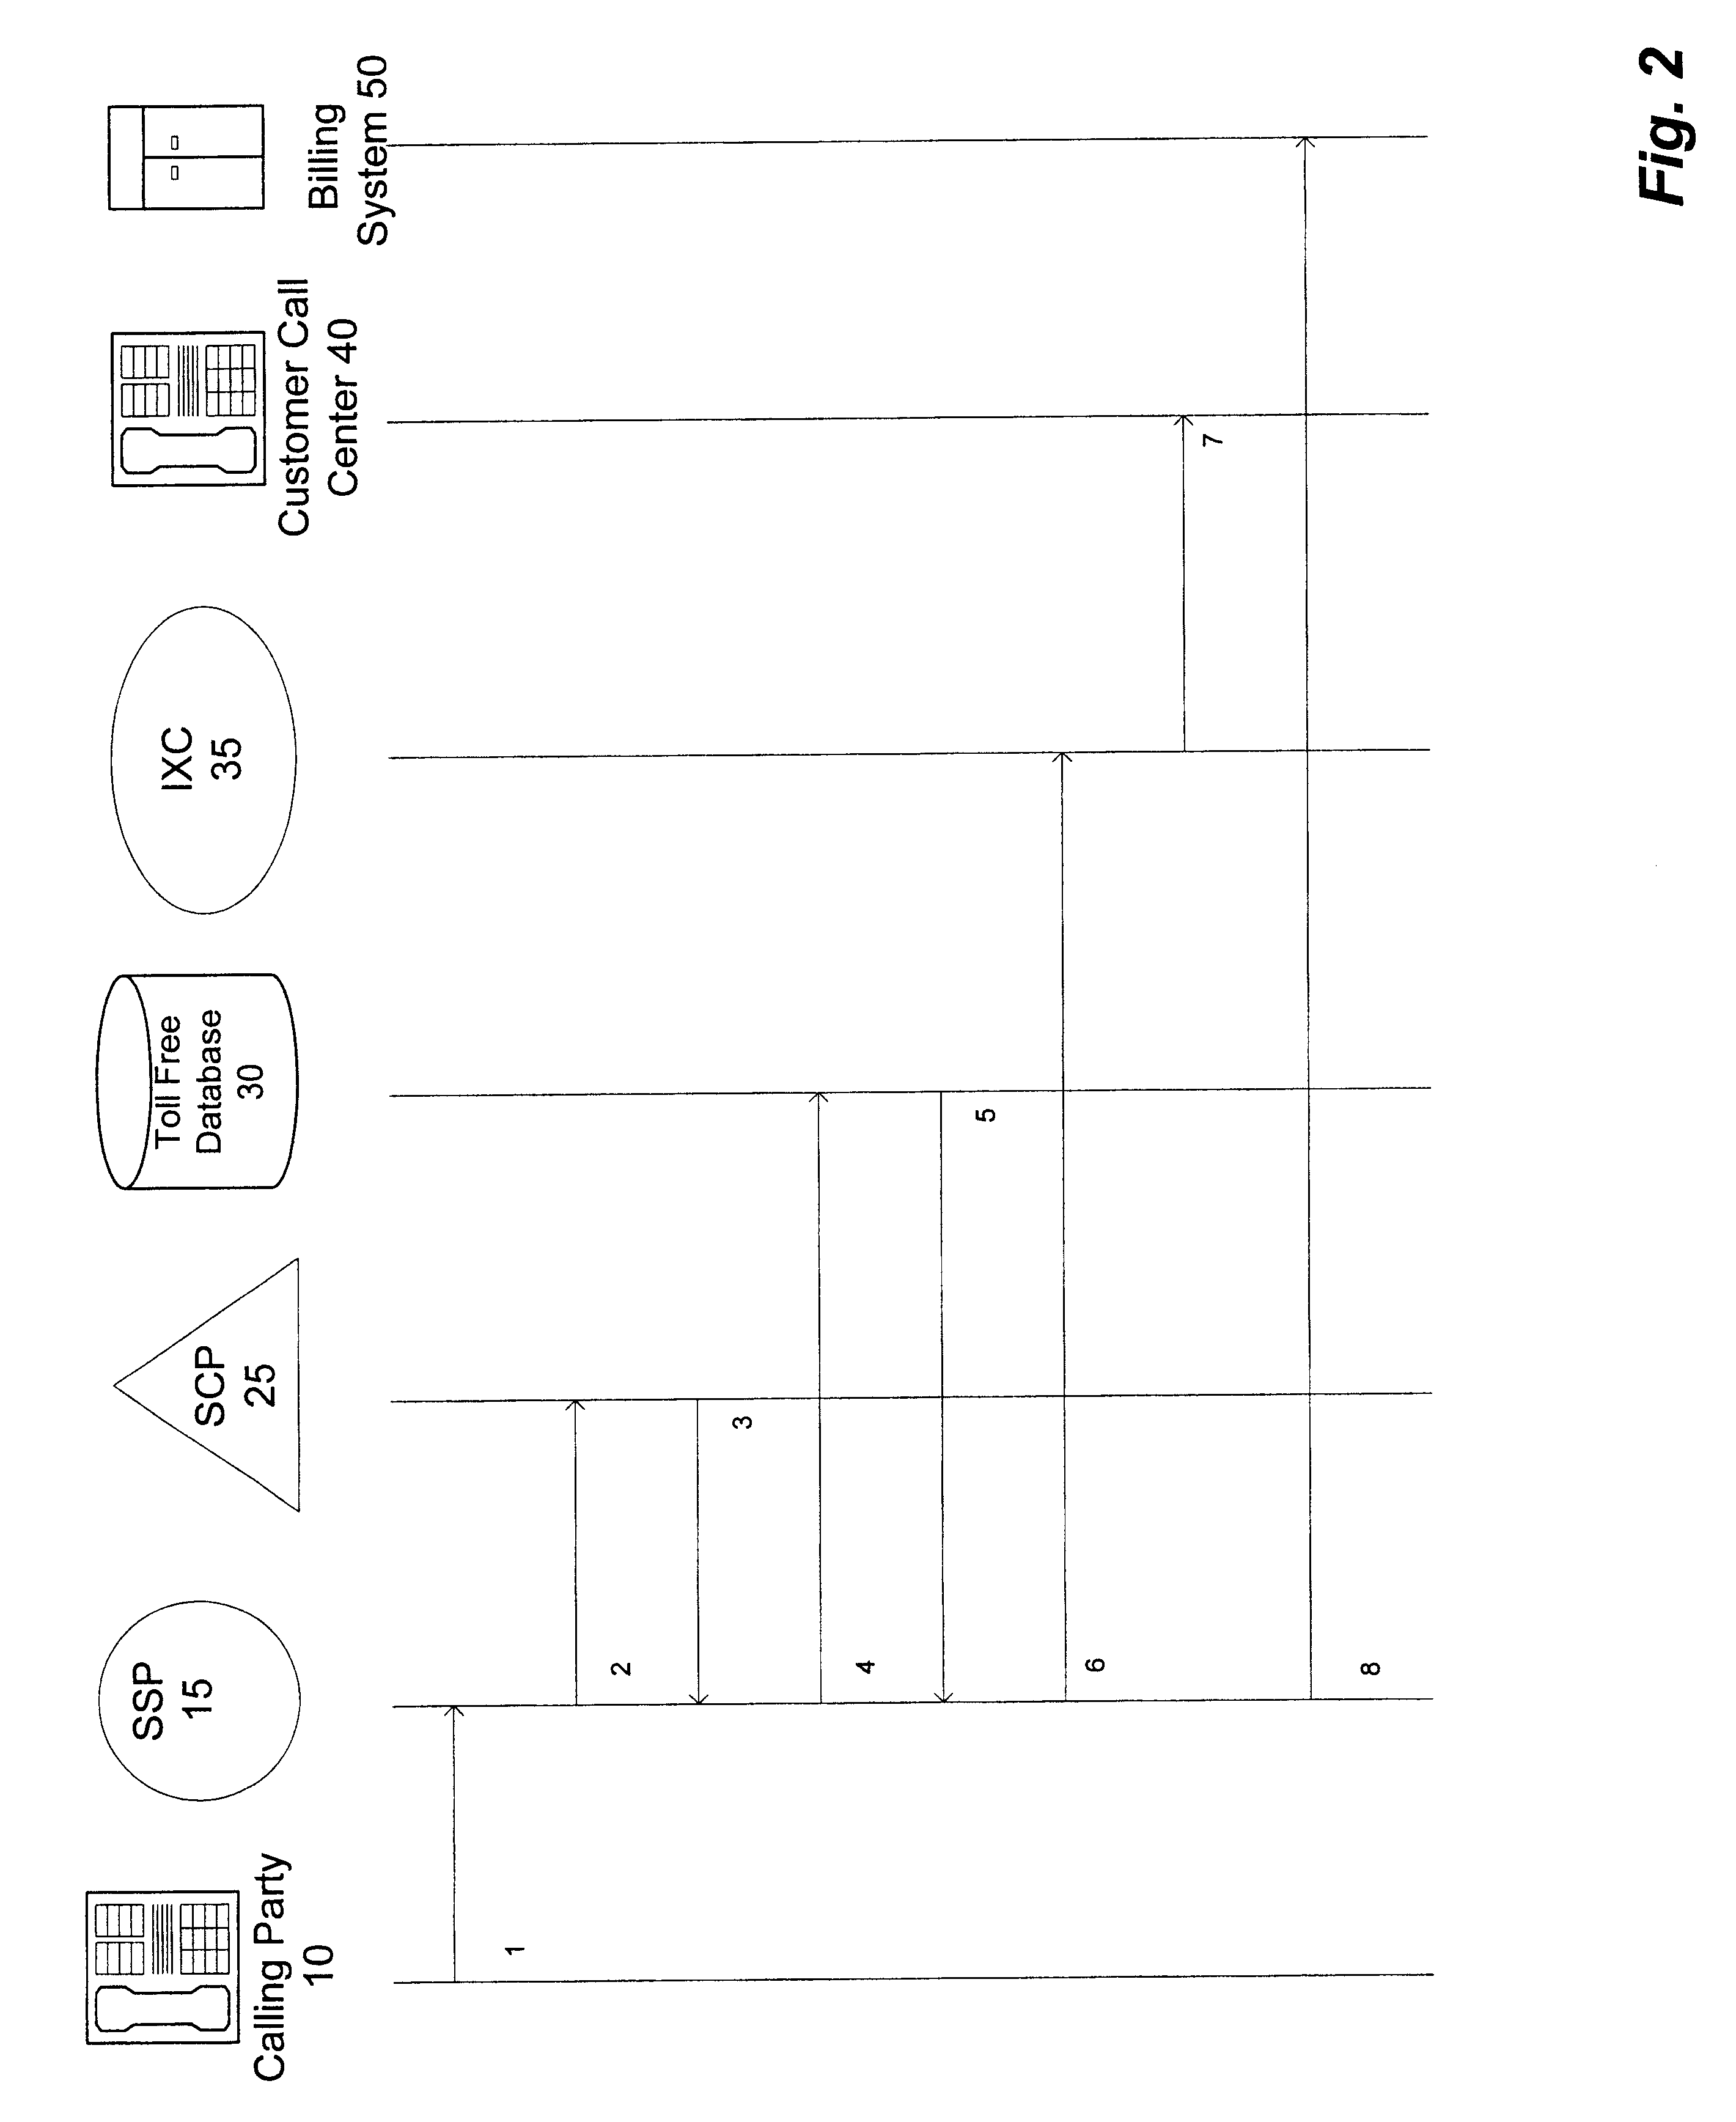 Method of billing in an abbreviated dialing service